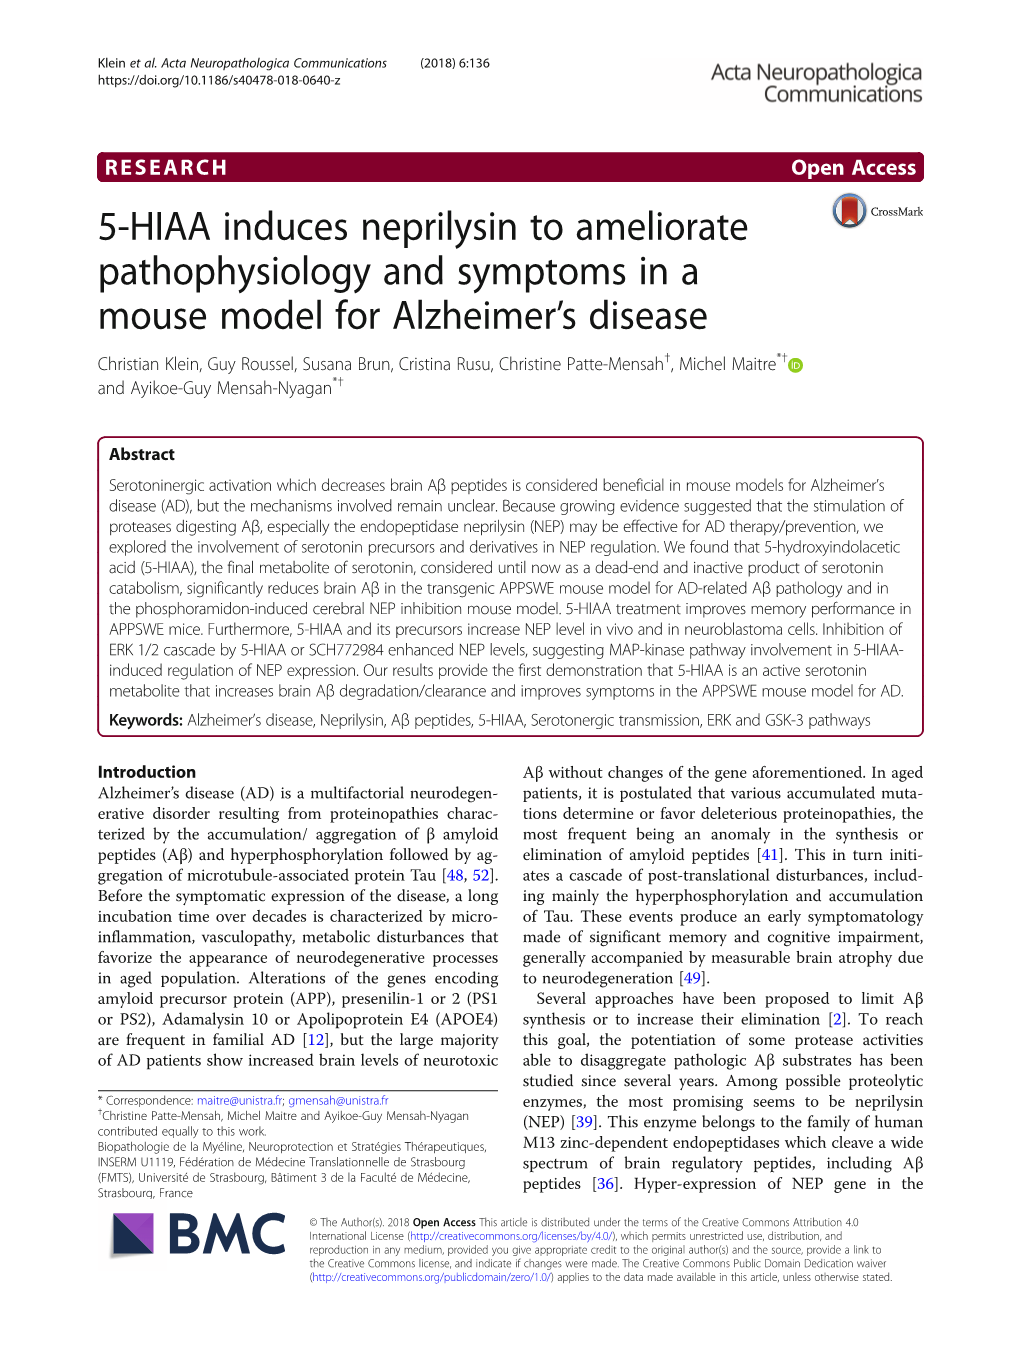 5-HIAA Induces Neprilysin to Ameliorate Pathophysiology And